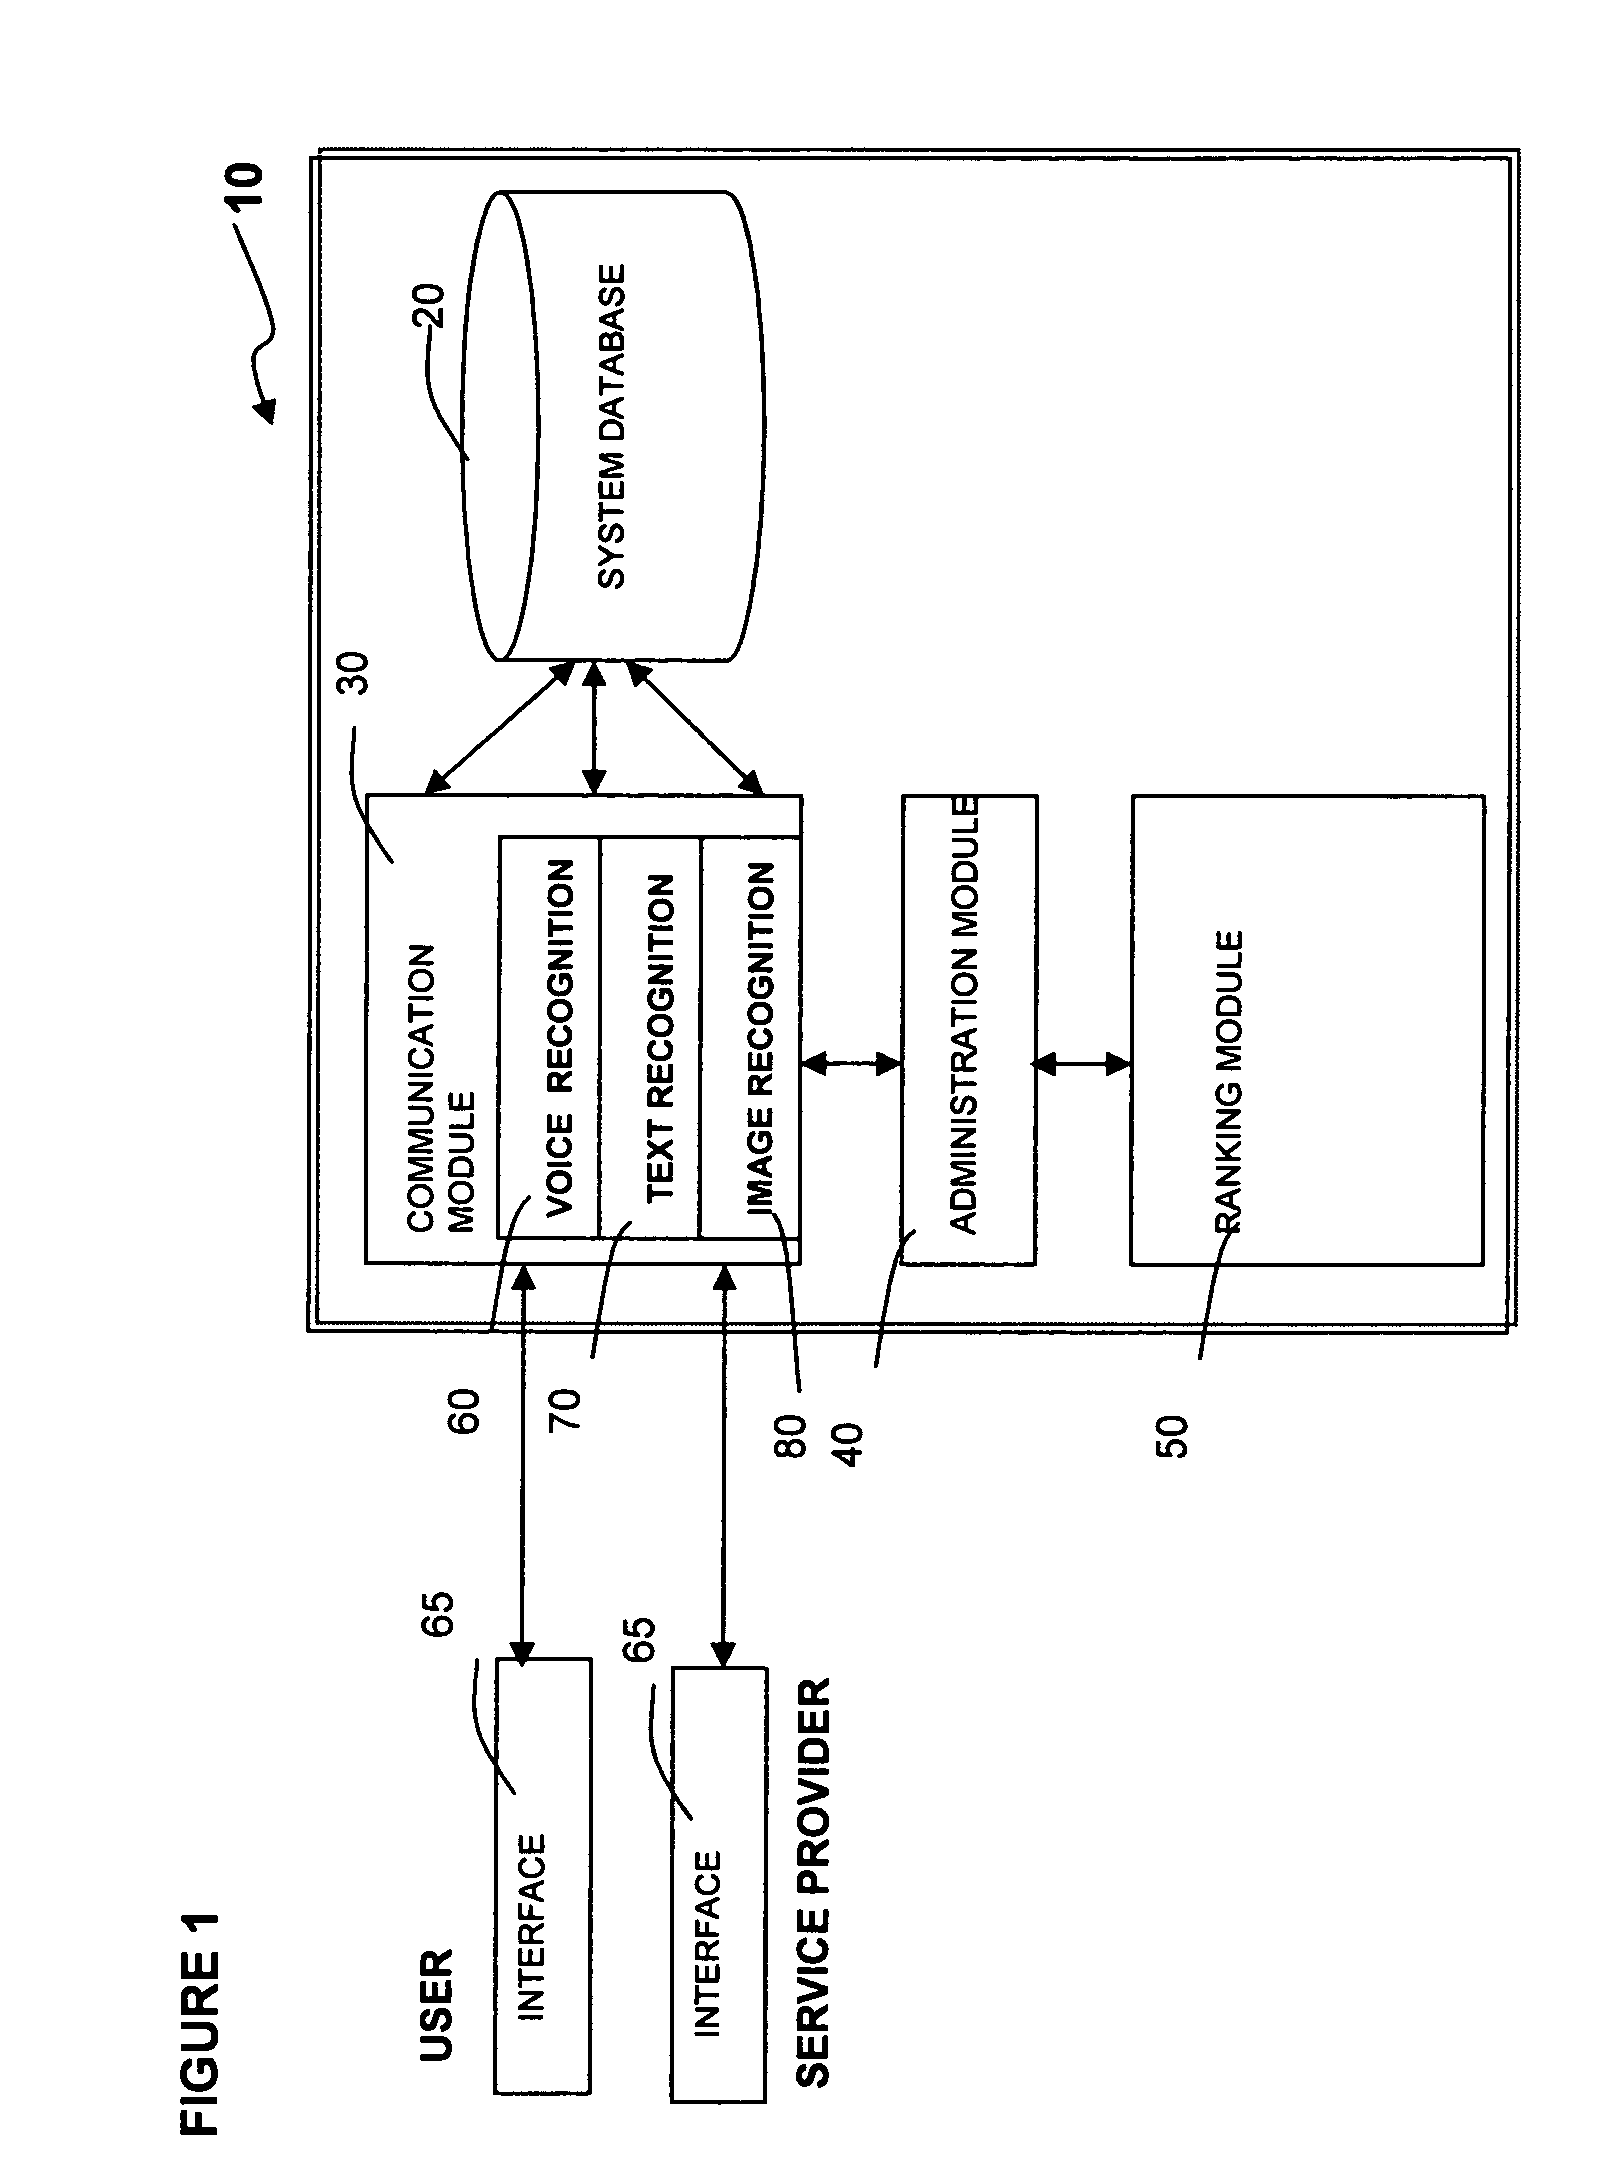 Automated system and method for ordering goods and services